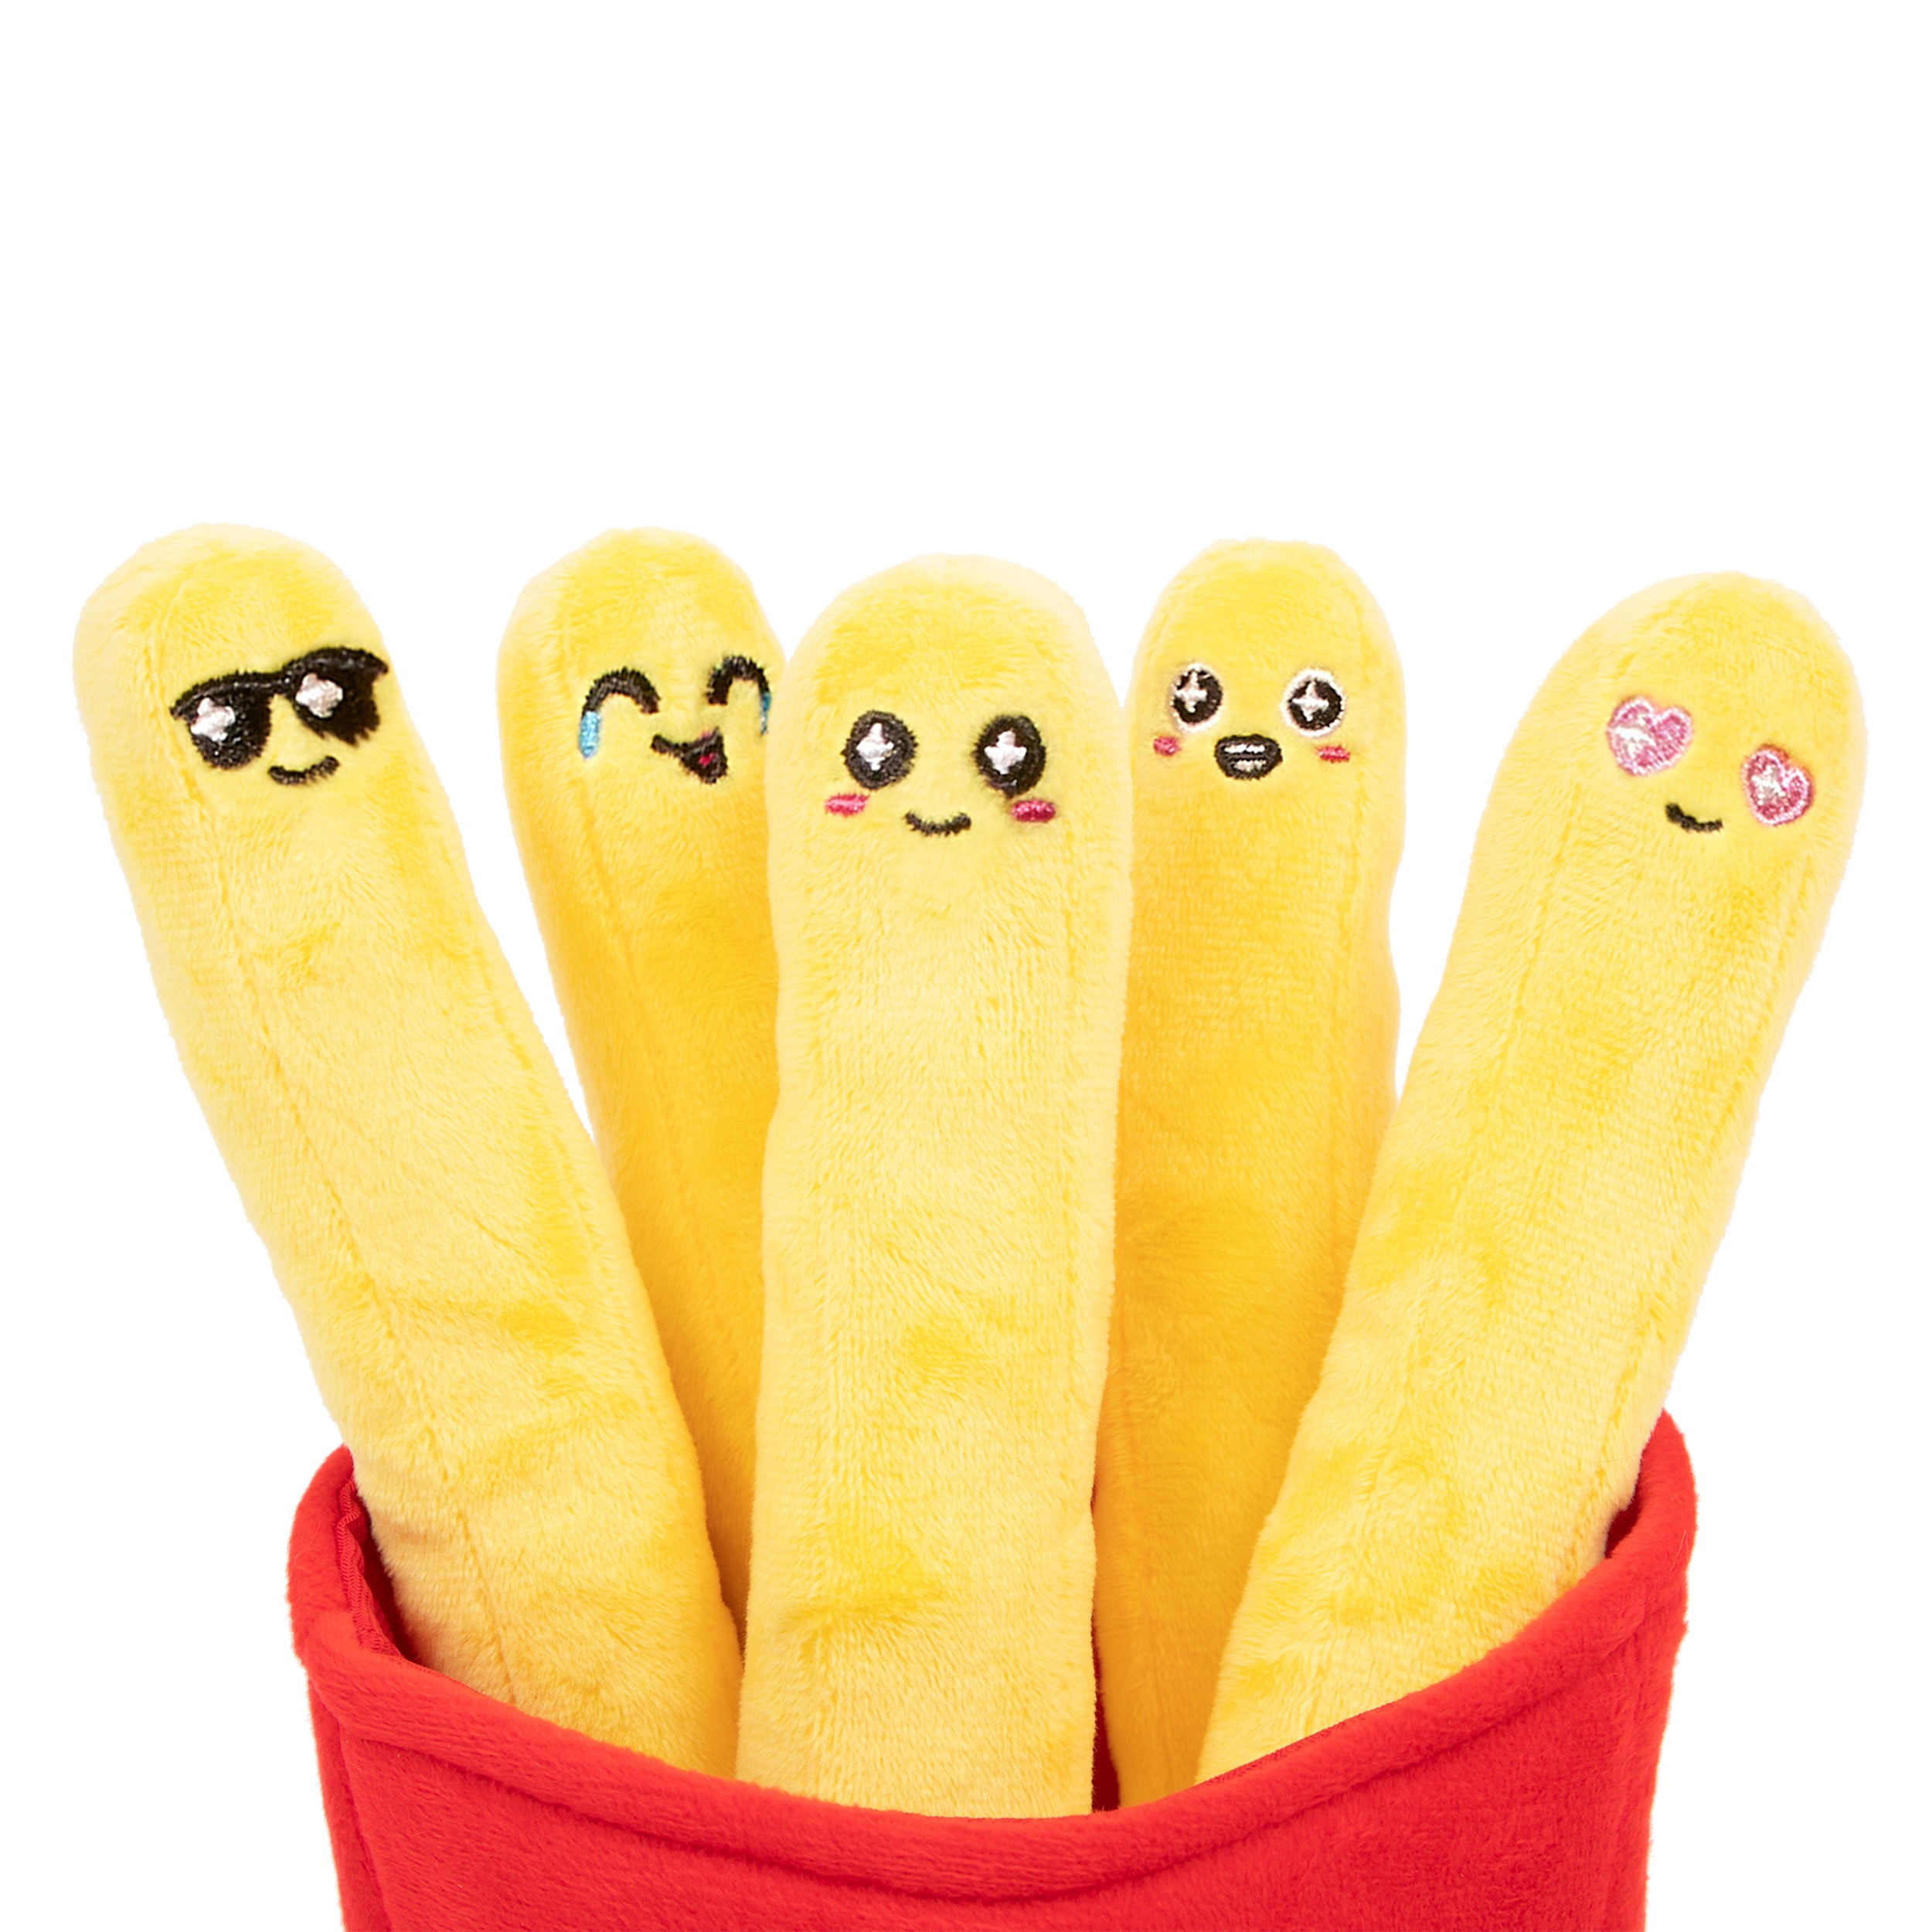 The Ultimate Comfort Food: Emotional Support Fries from What Do You Meme?®  